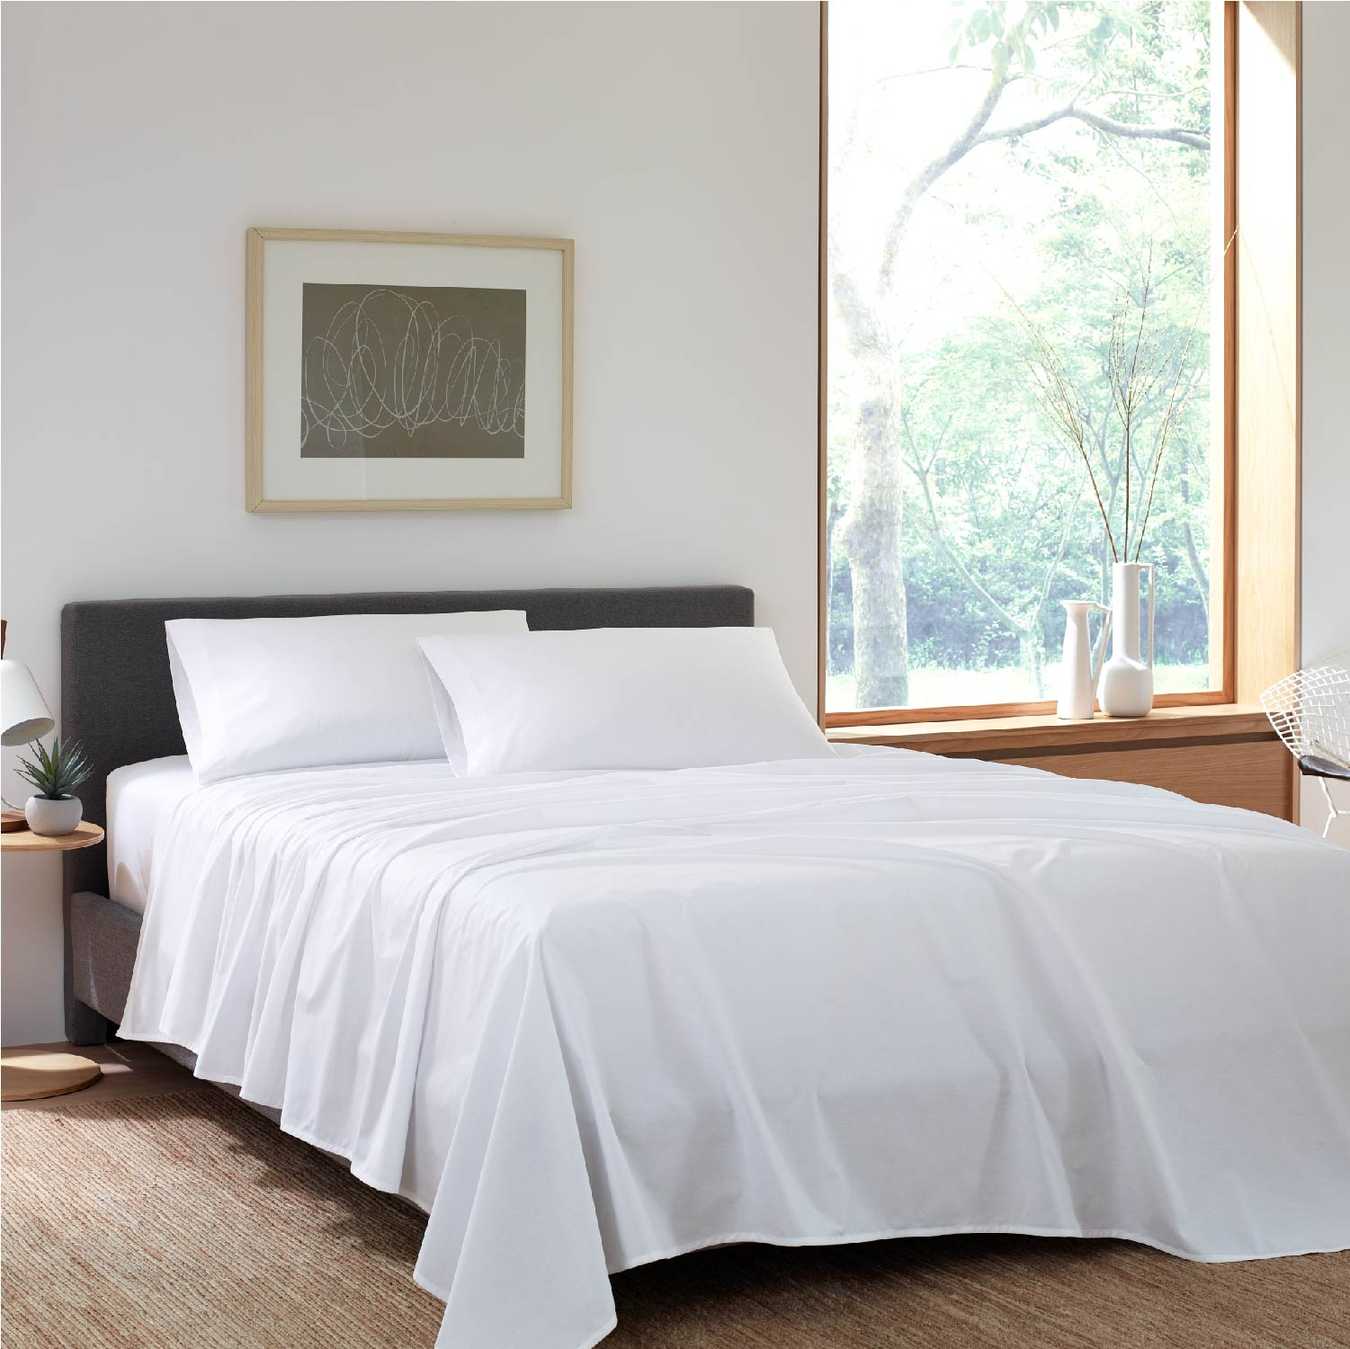 goto bedding precale fitted bed sheets, bedding, sleep